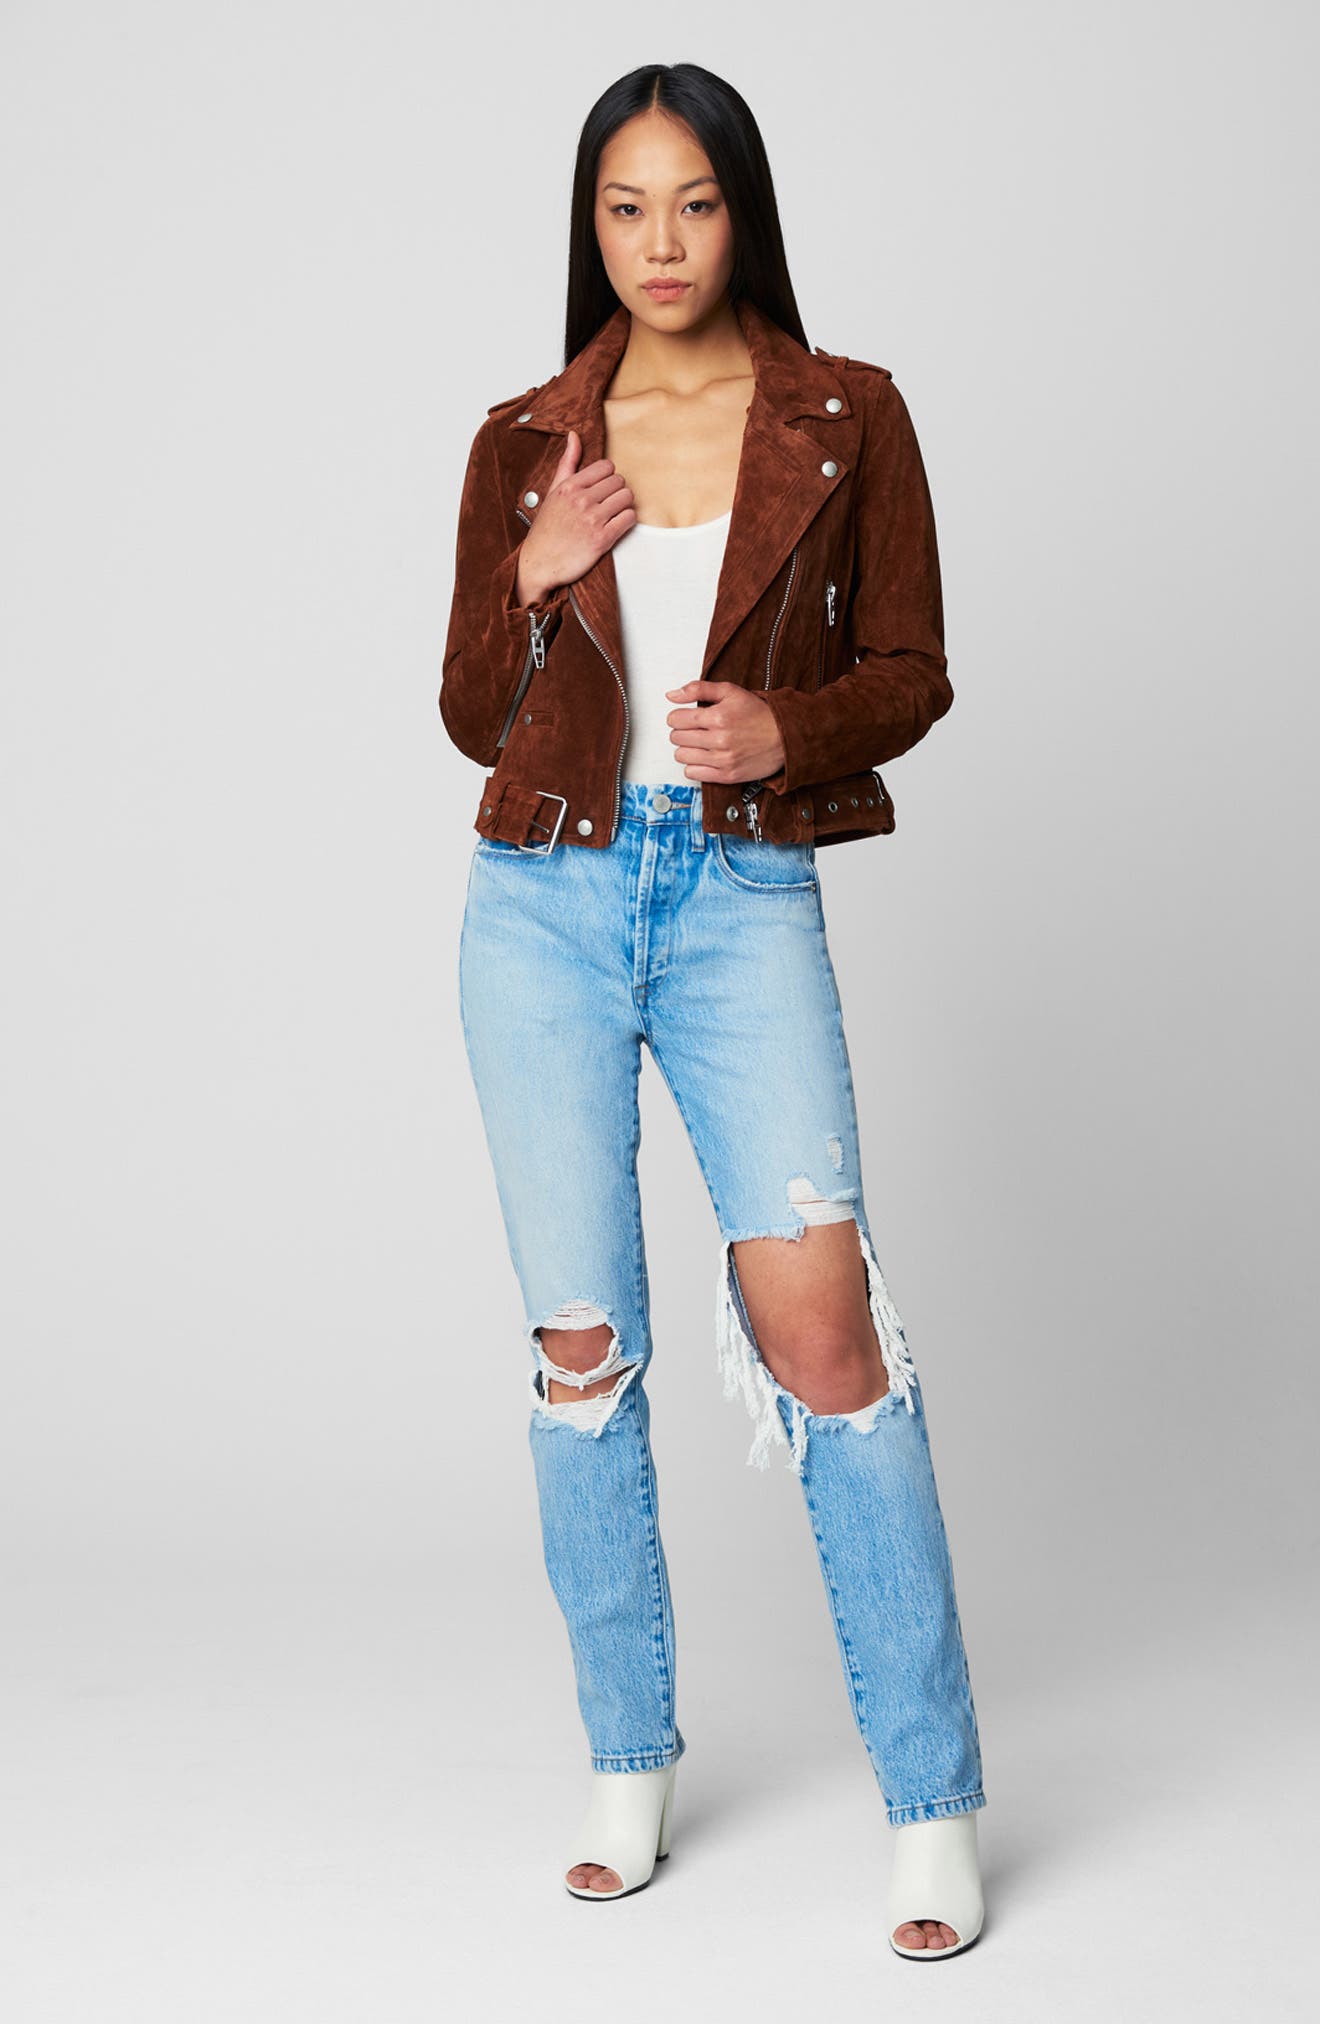 2019 S-XL New Spring Fashion Bright Colors Ladies Suede Jacket,Brown,M,United States 